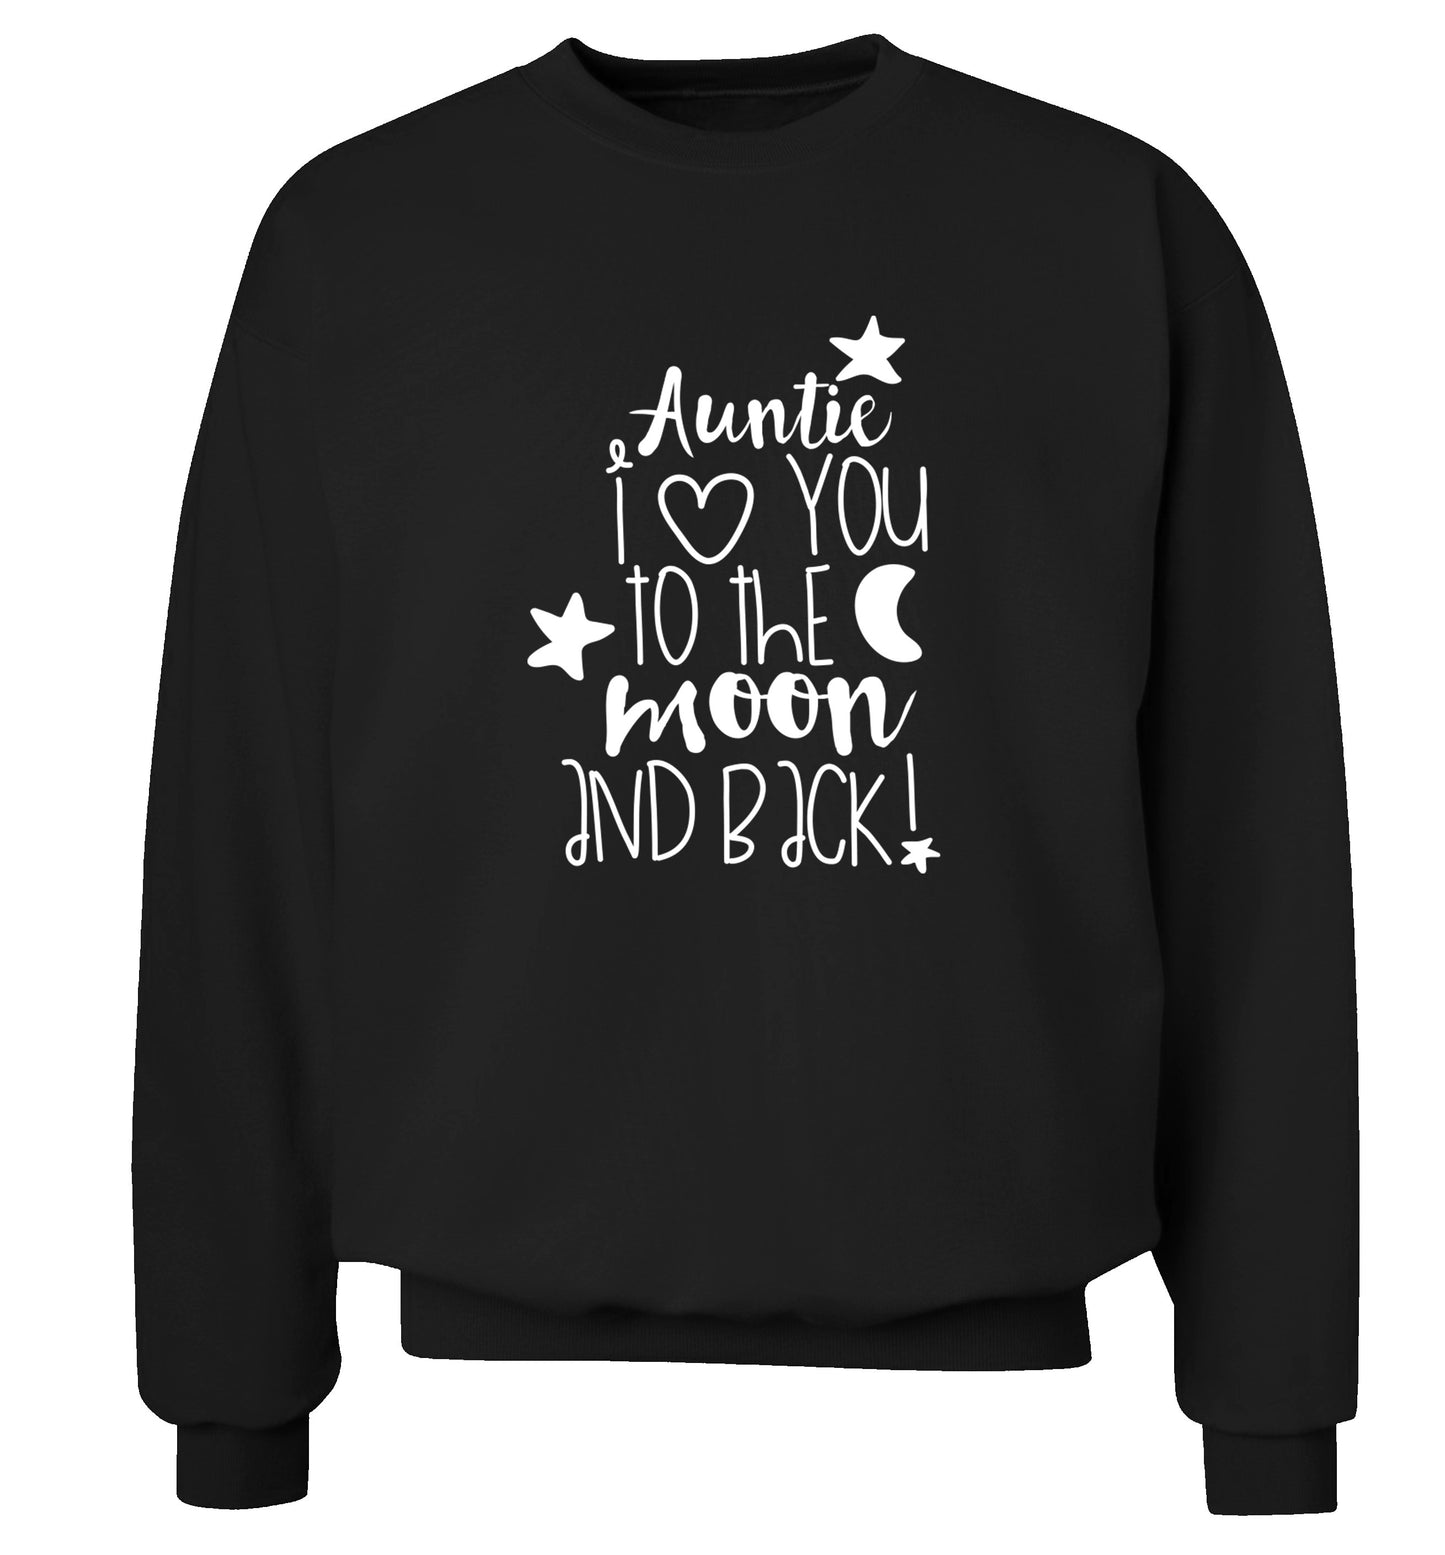 Auntie I love you to the moon and back Adult's unisex black  sweater 2XL